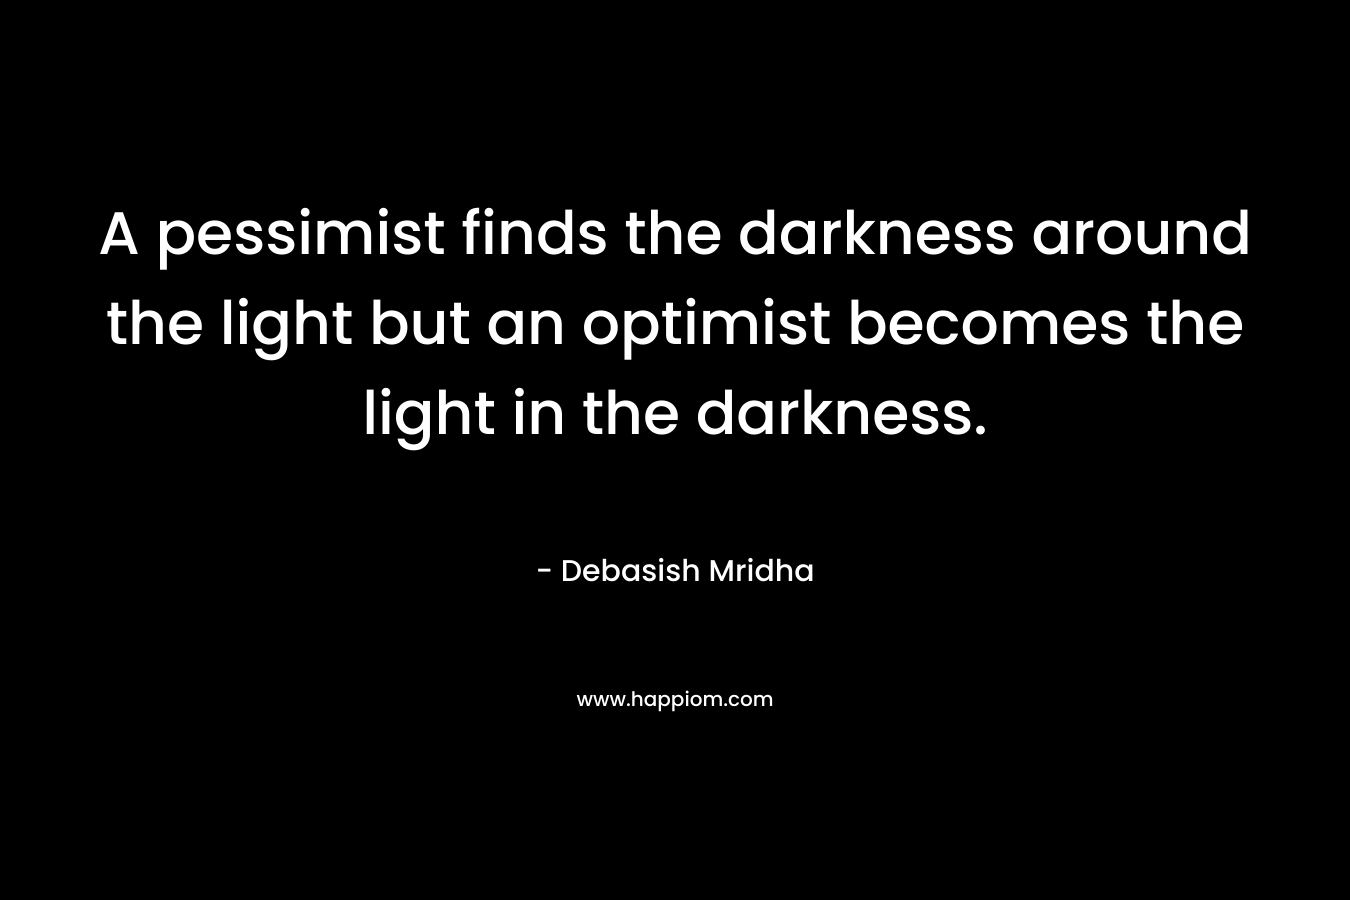 A pessimist finds the darkness around the light but an optimist becomes the light in the darkness.